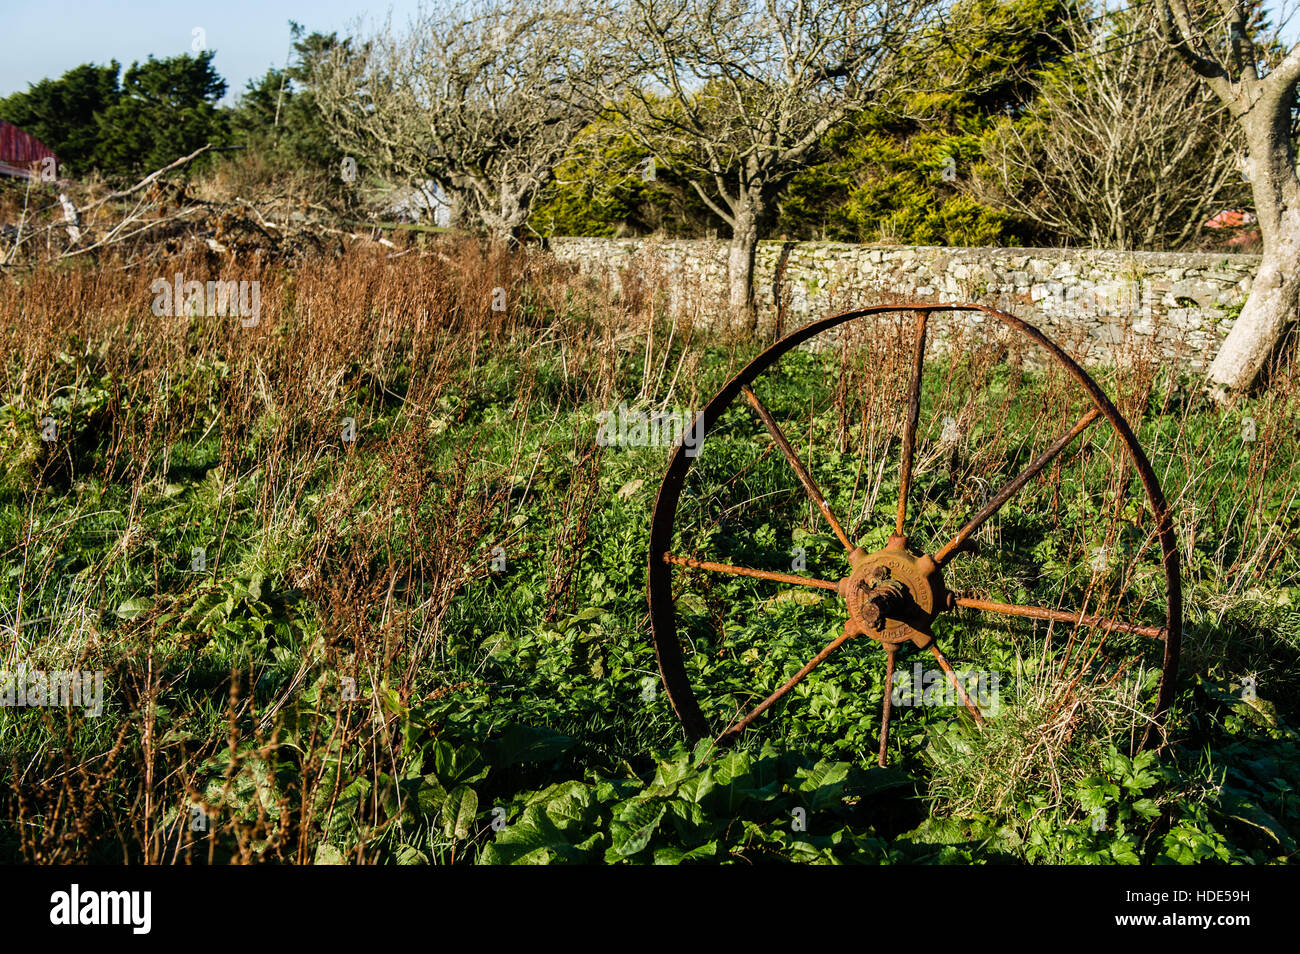 A piece of rusty, old and disused farm equipment in an overgrown field in Ireland. Stock Photo